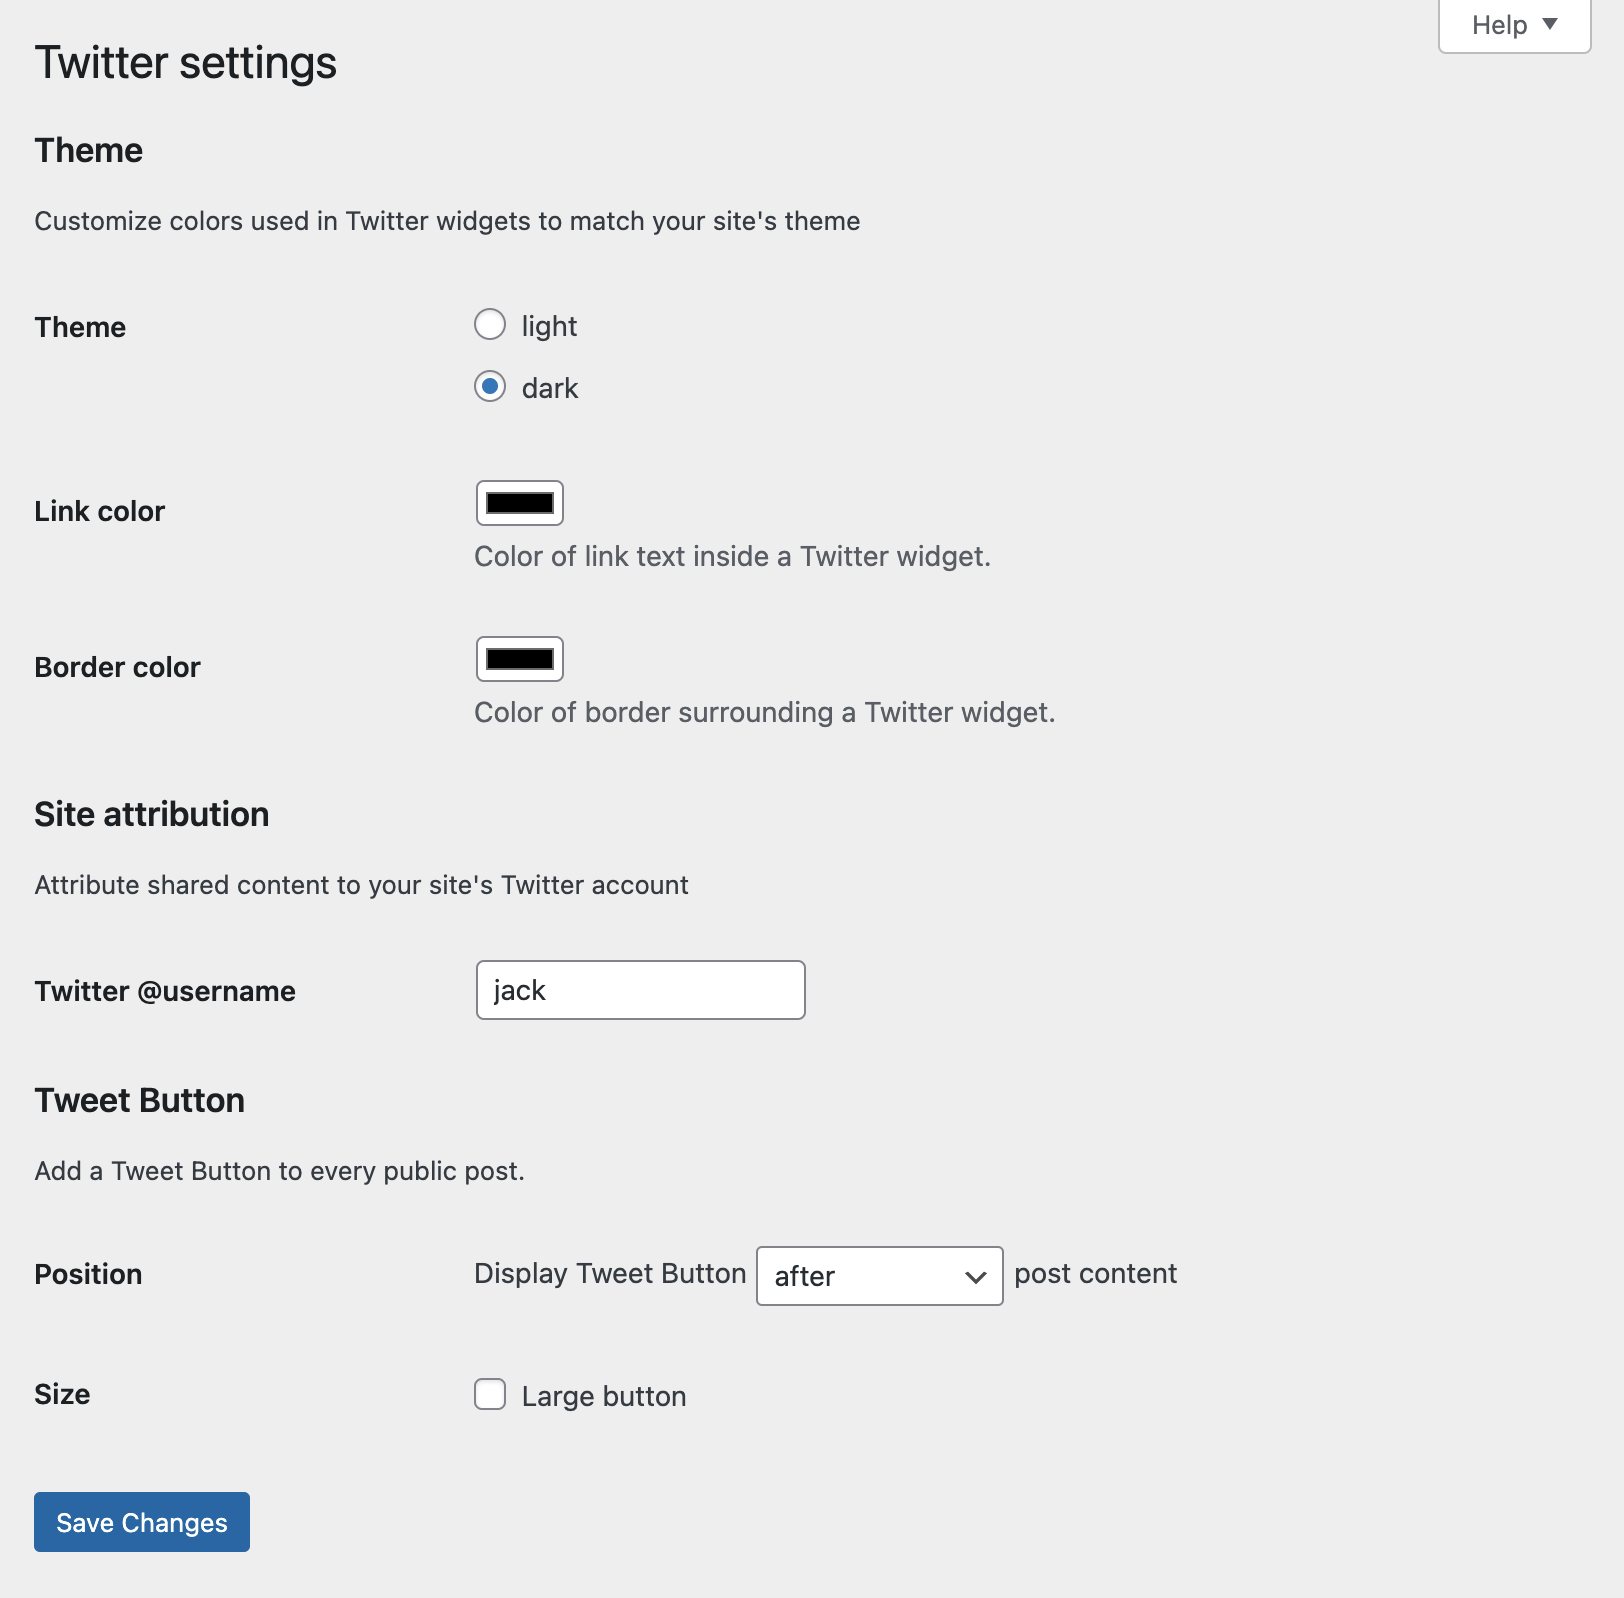 Twitter settings: theme light or dark, link color, border color, site attribution, tweet button...